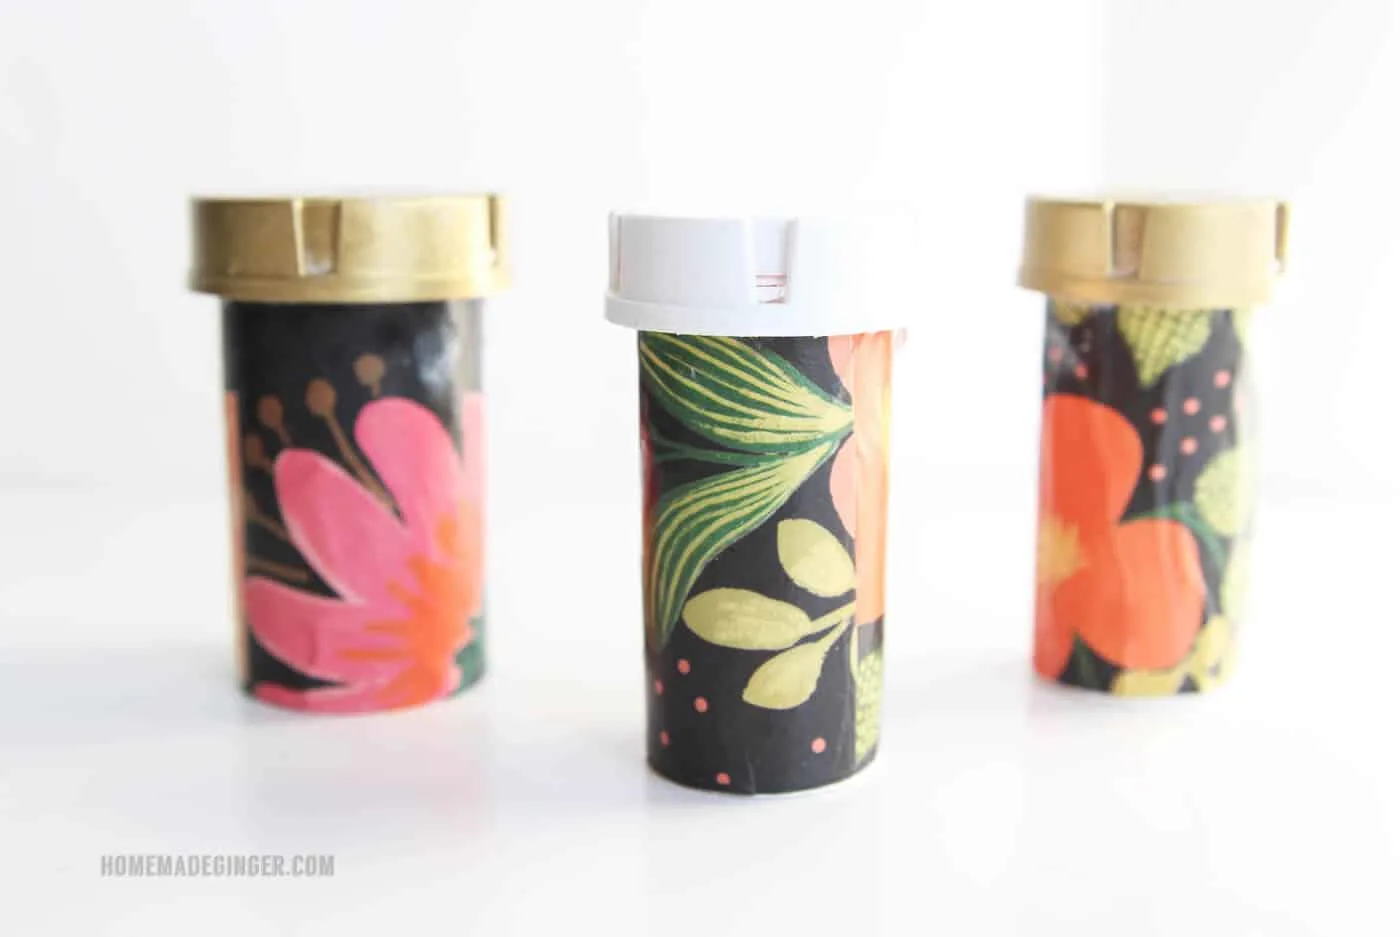 Recycle Pill Bottles into Useful Organizers - Mod Podge Rocks